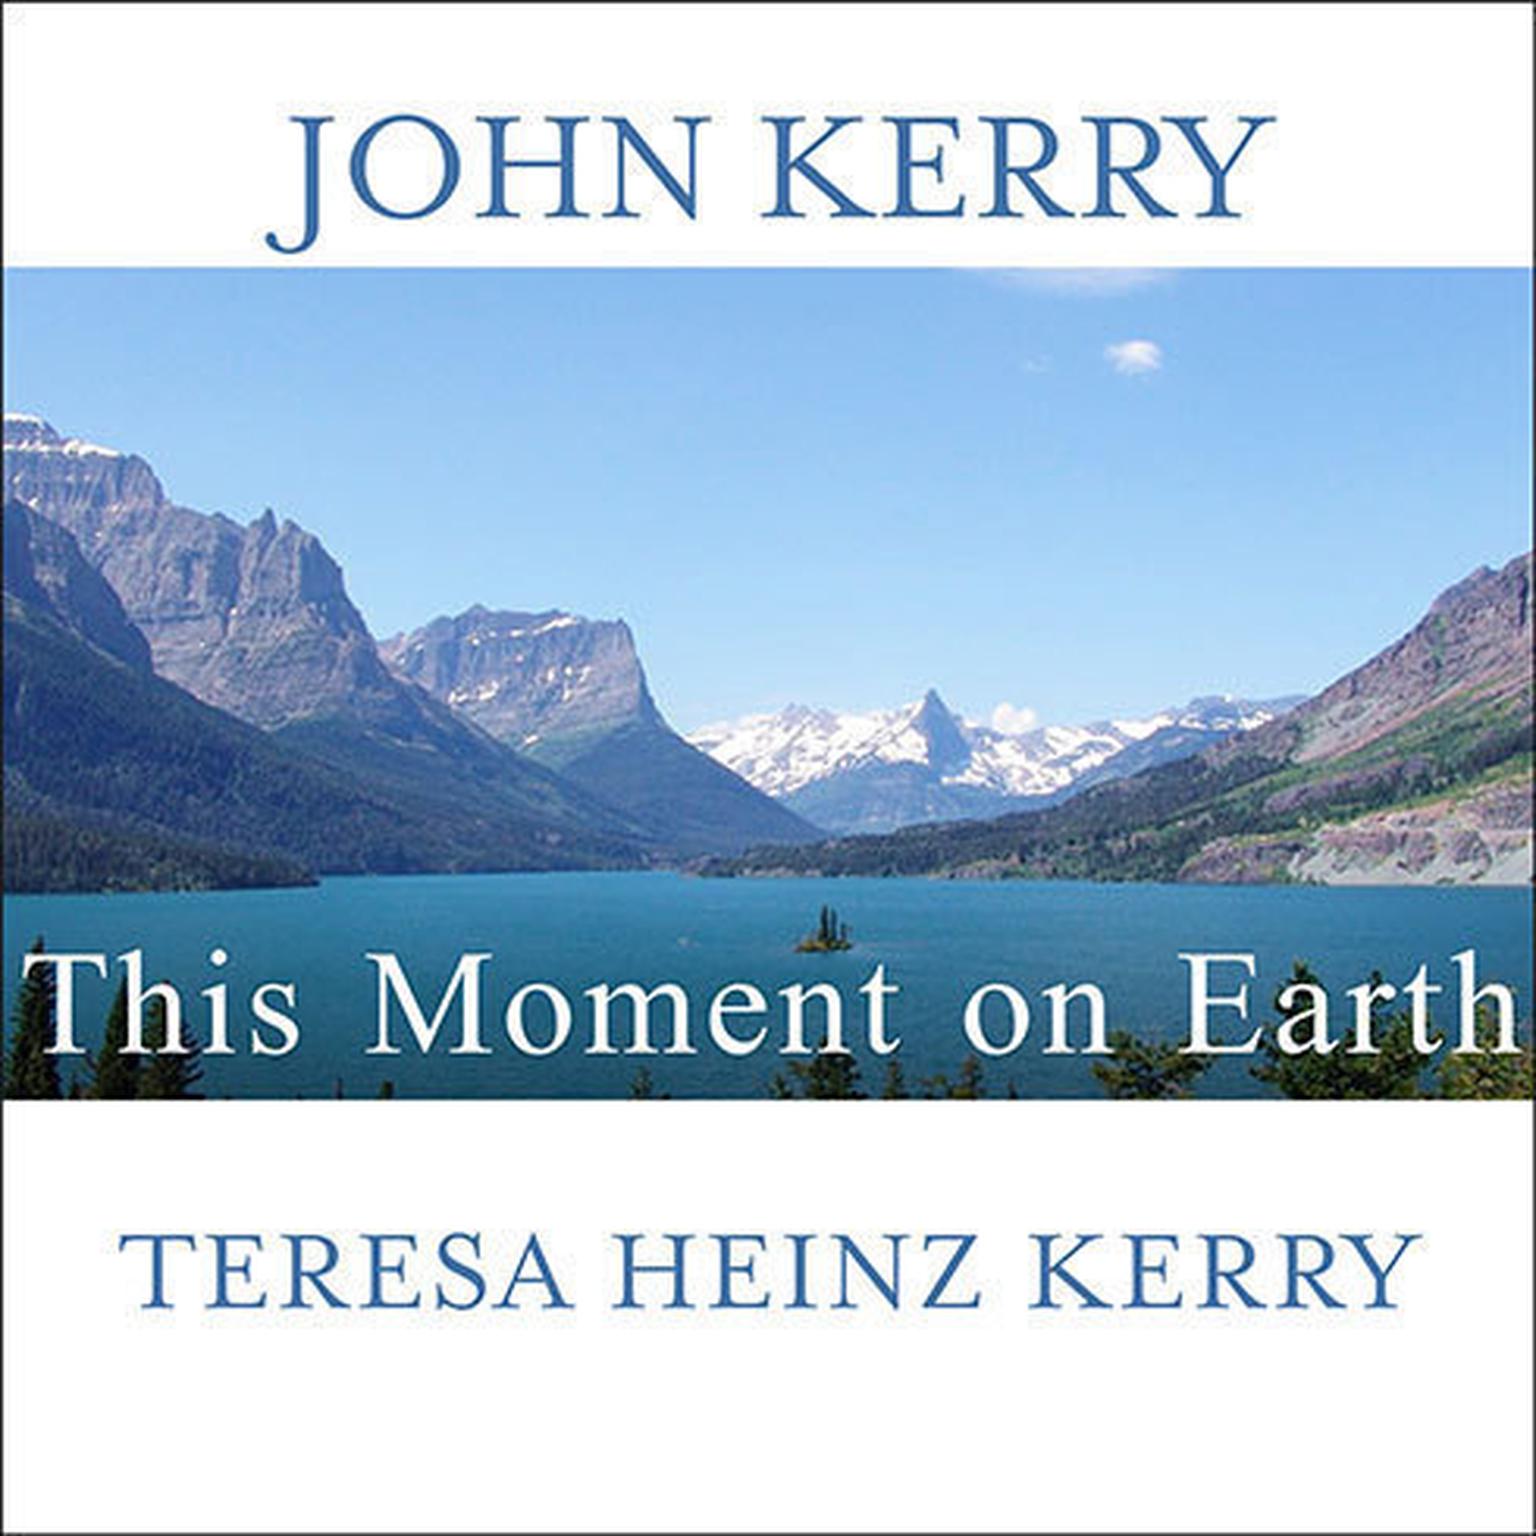 This Moment on Earth: Todays New Environmentalists and Their Vision for the Future Audiobook, by John Kerry